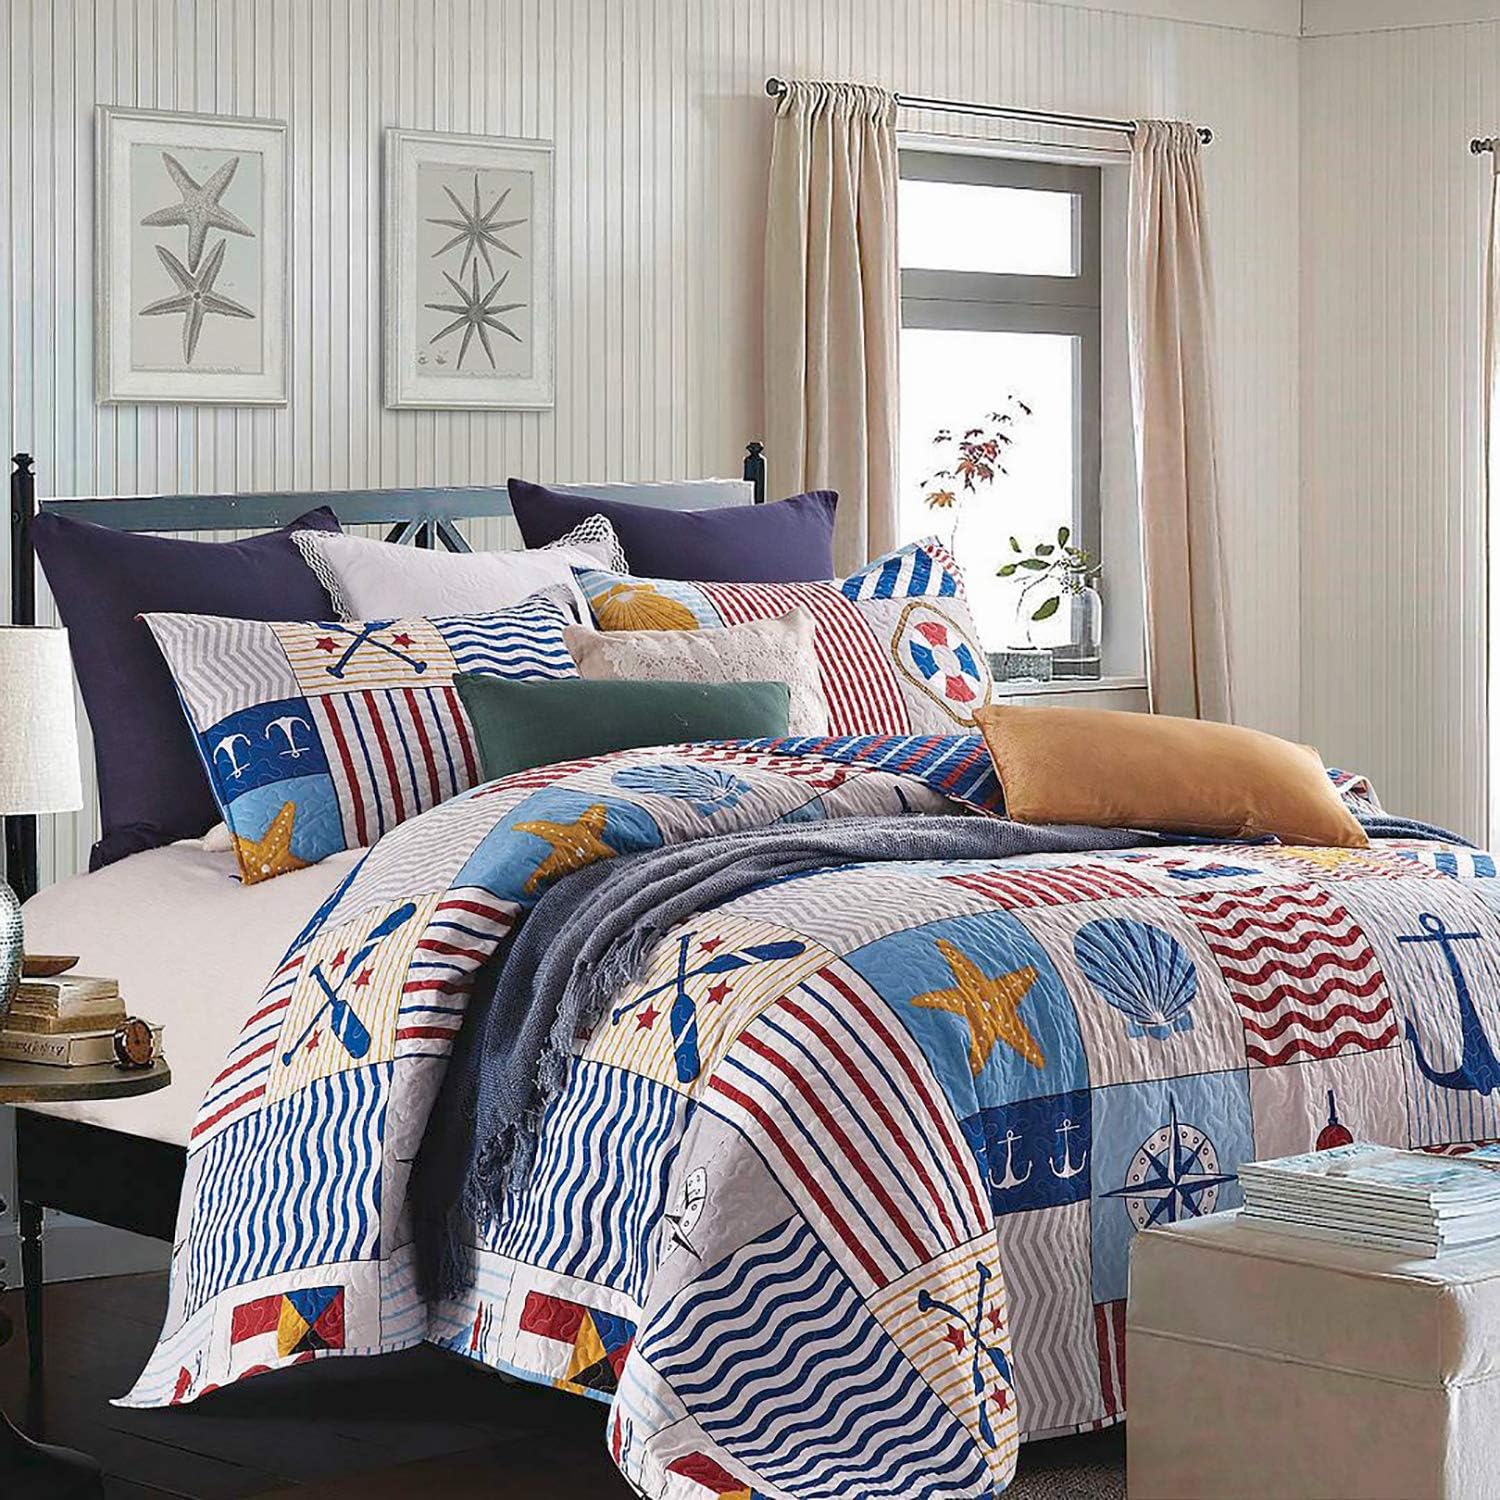 Virah Bella Quilt Bedding Set in King Anchors Away Printed Lightweight Reversible Quilt with 2 Matching Pillow Shams - Cozy & Beautiful Coastal-Themed Bedding